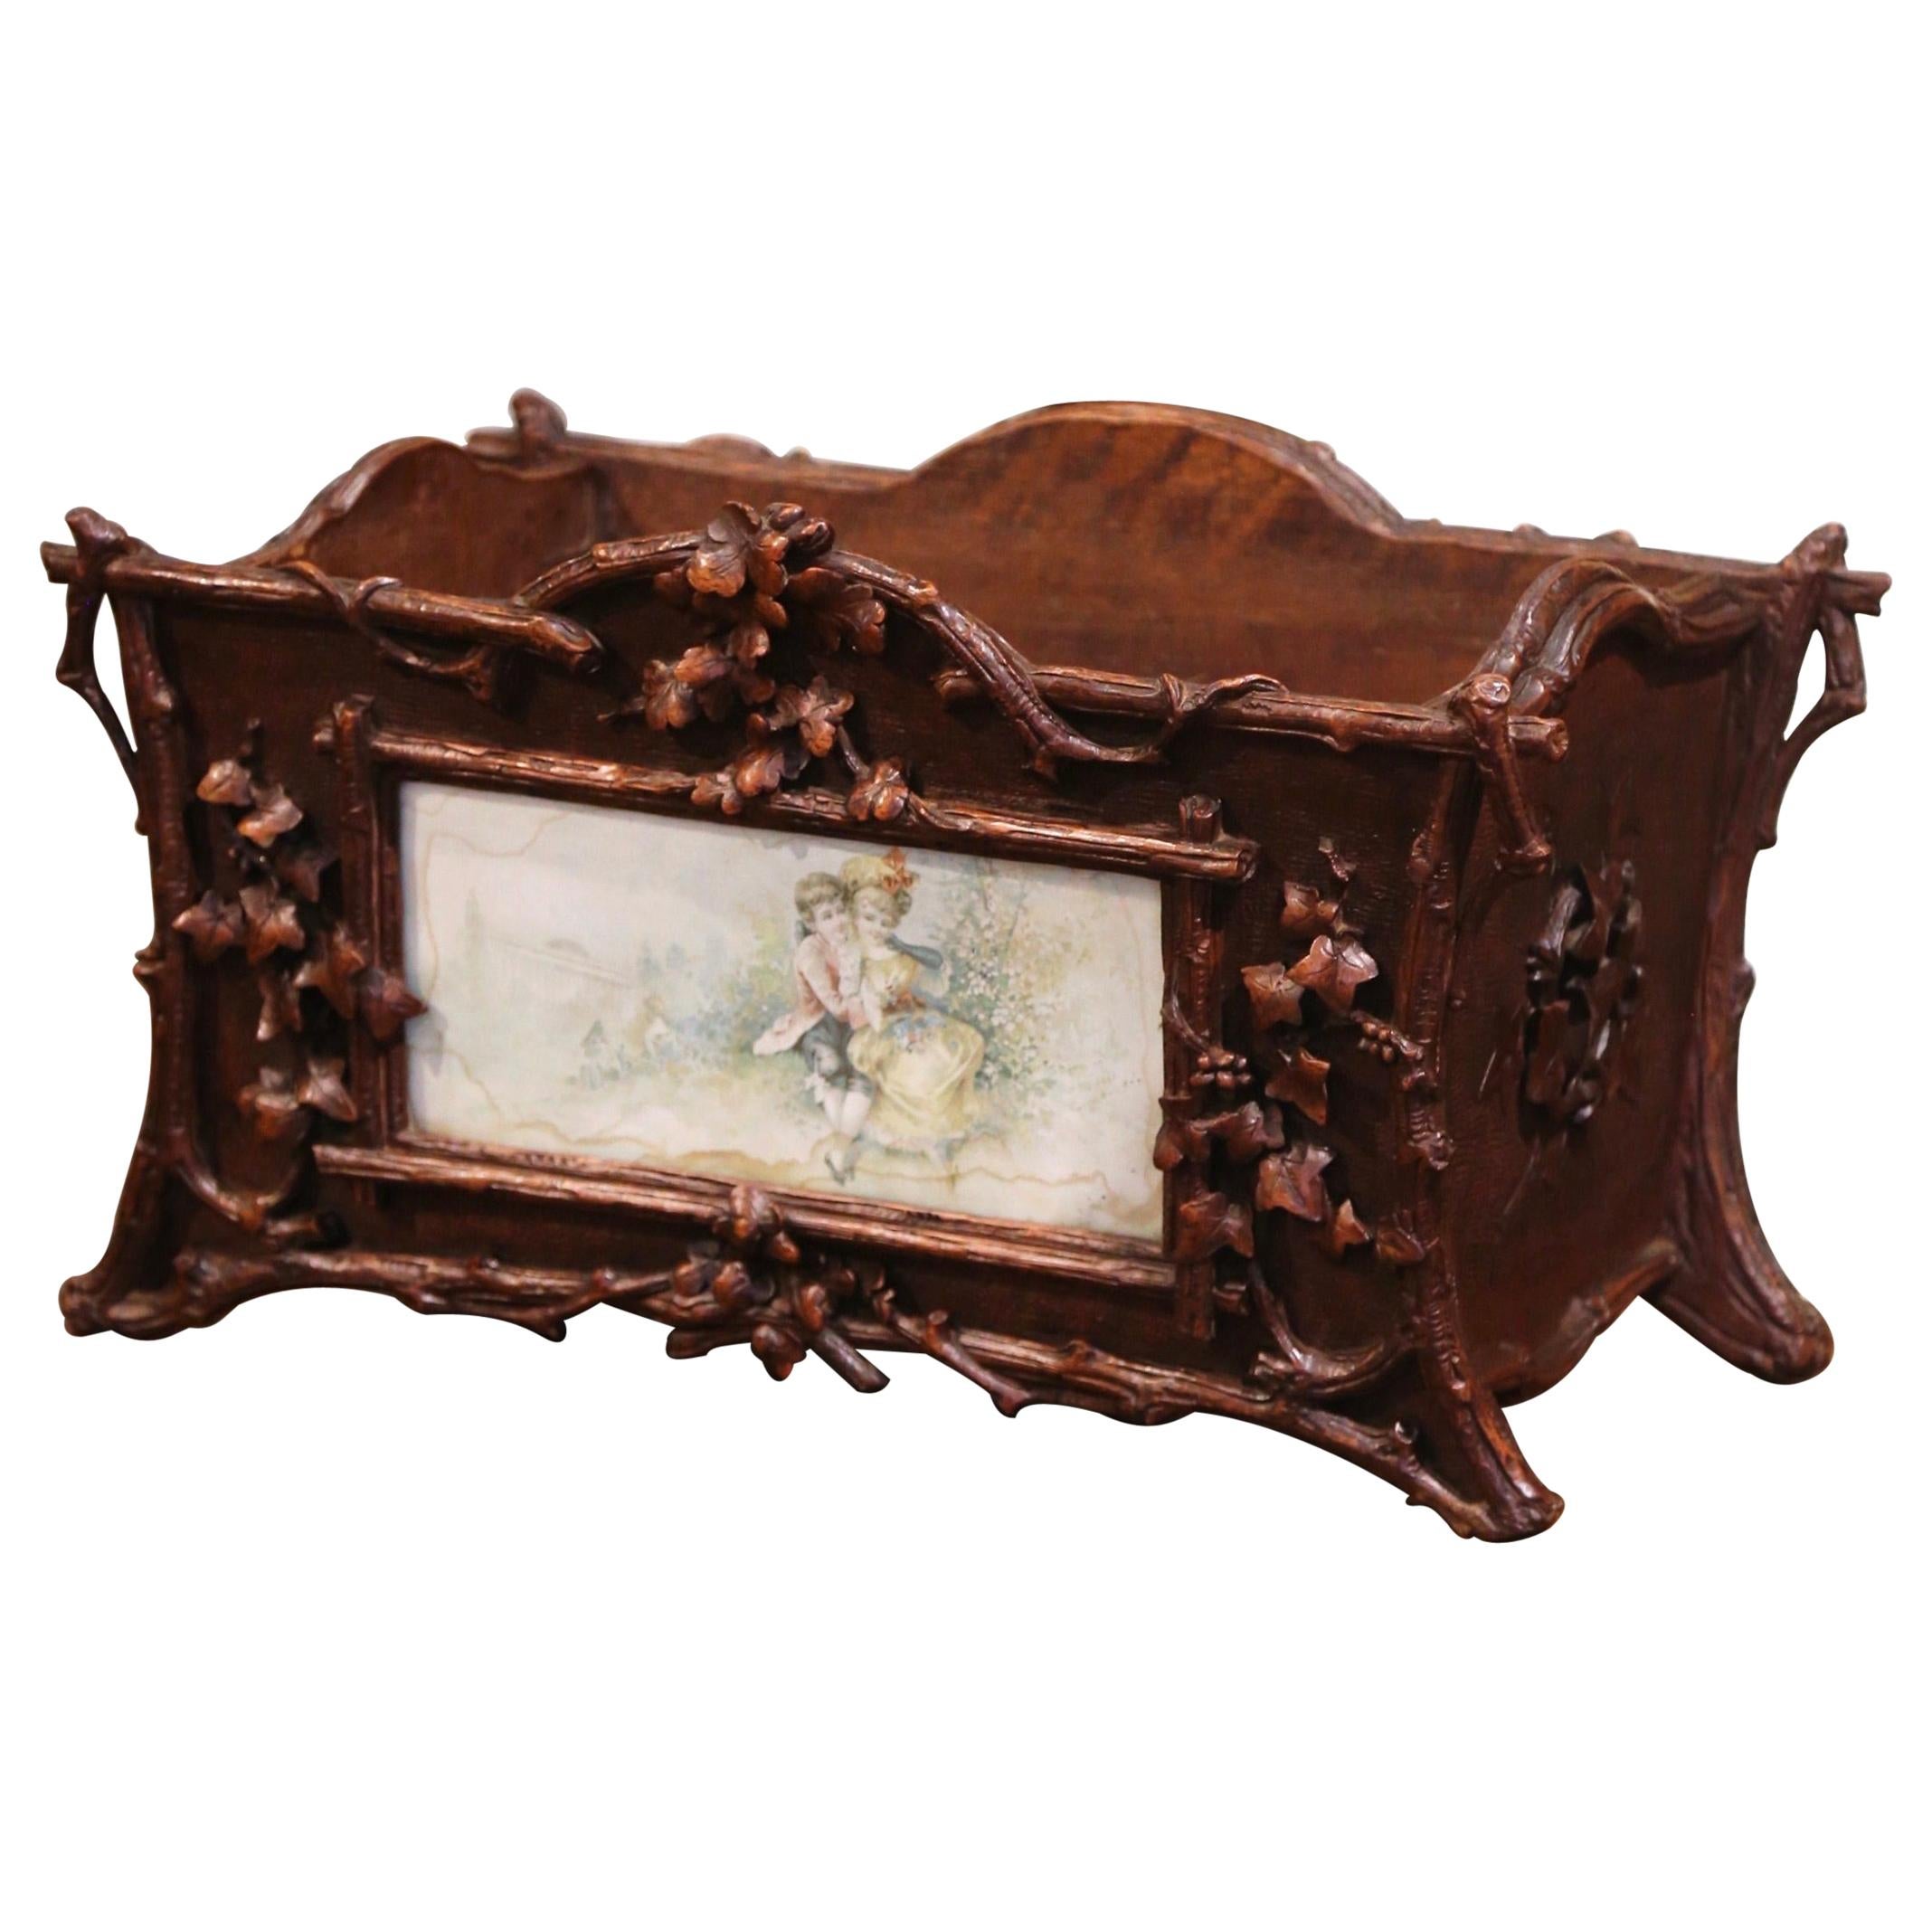 19th Century French Black Forest Carved Walnut and Porcelain Jardinière